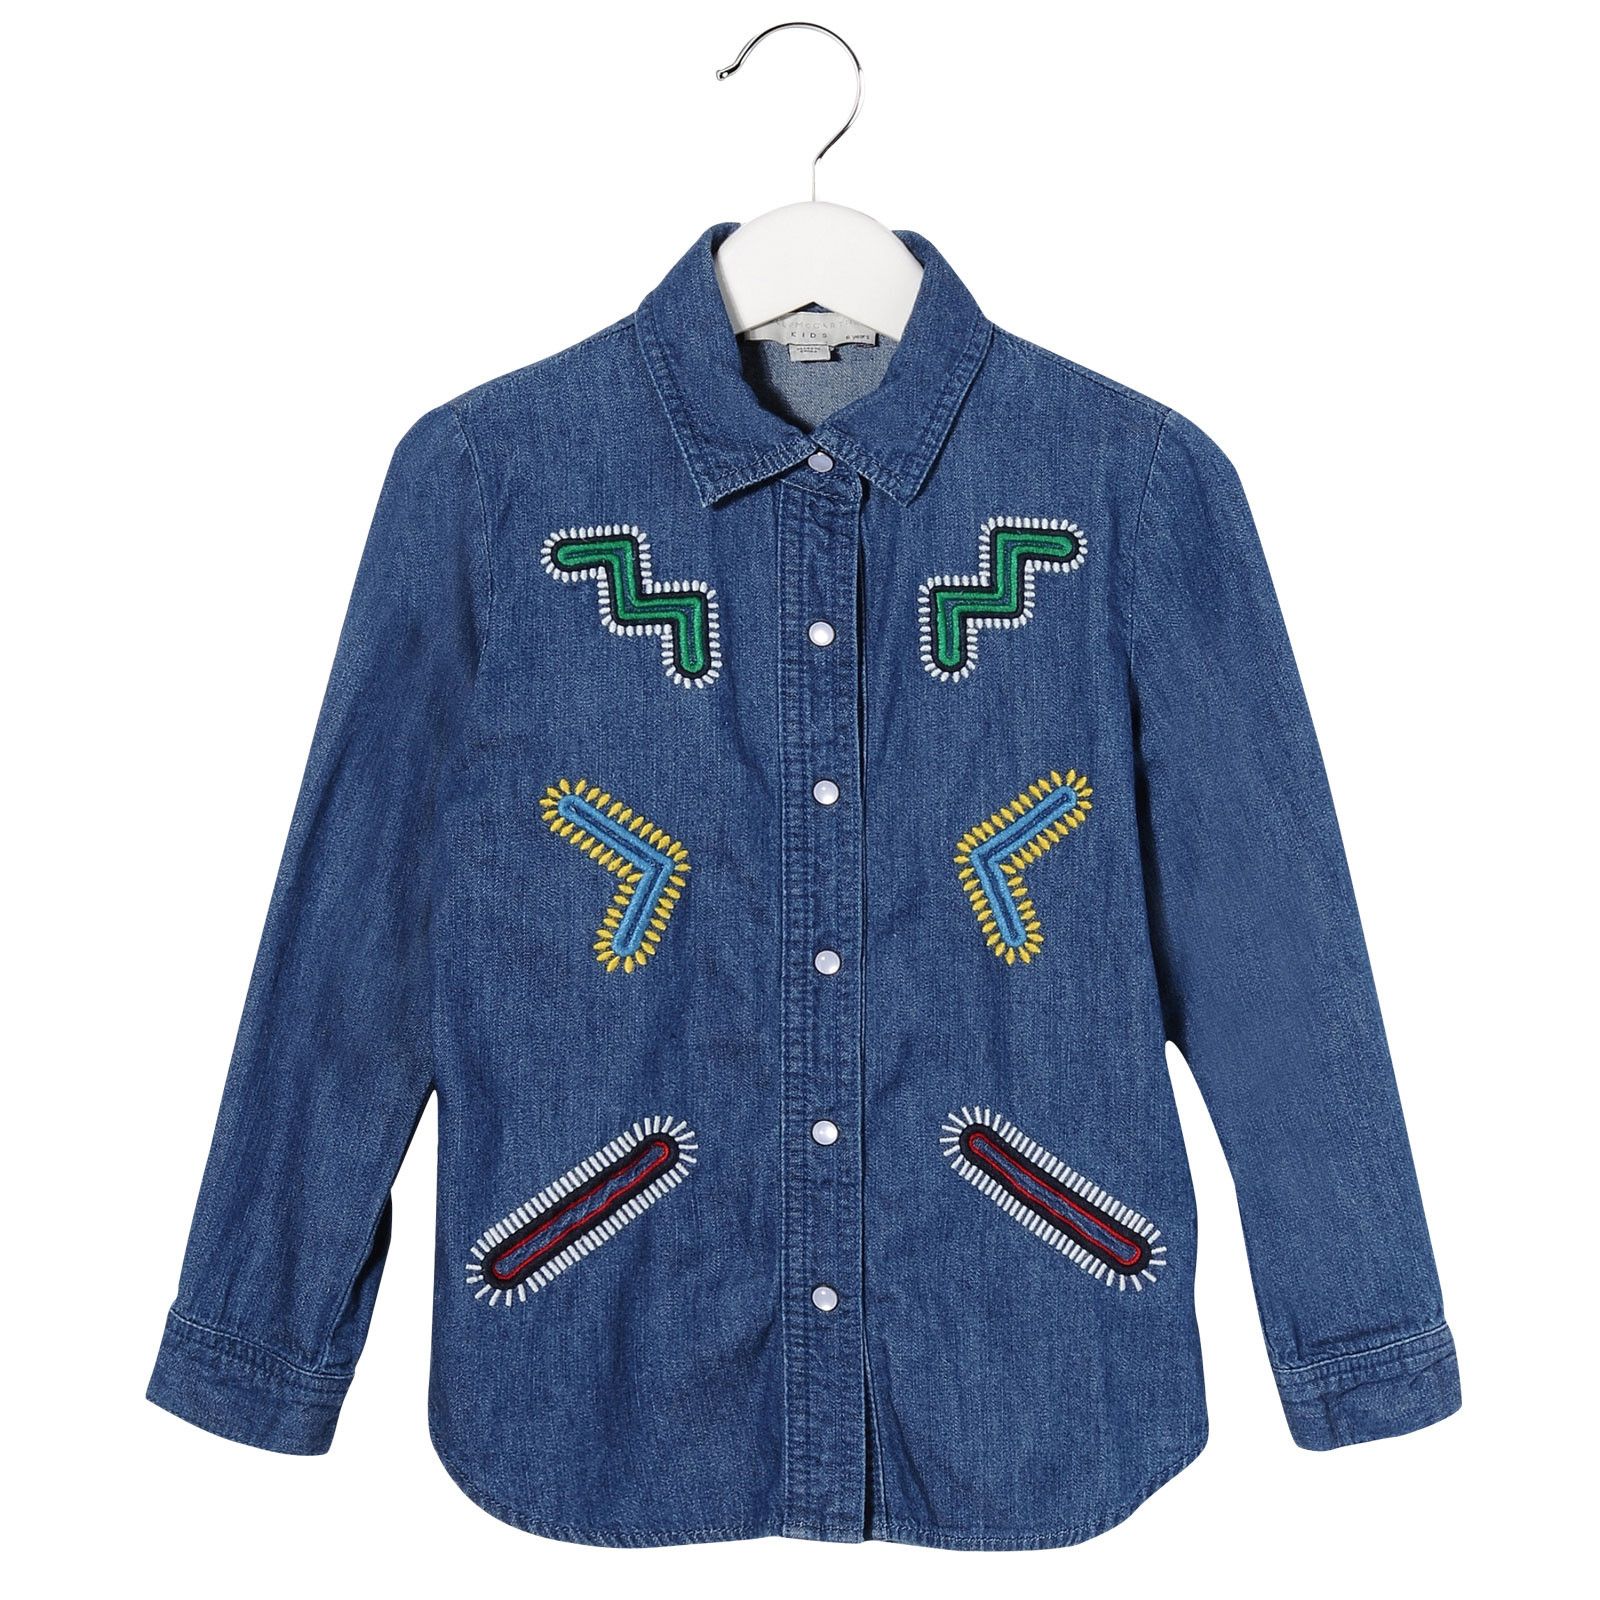 Girls Blue Cotton Denim Blouse With Colorful Zig Zag Embroidered Trims - CÉMAROSE | Children's Fashion Store - 1